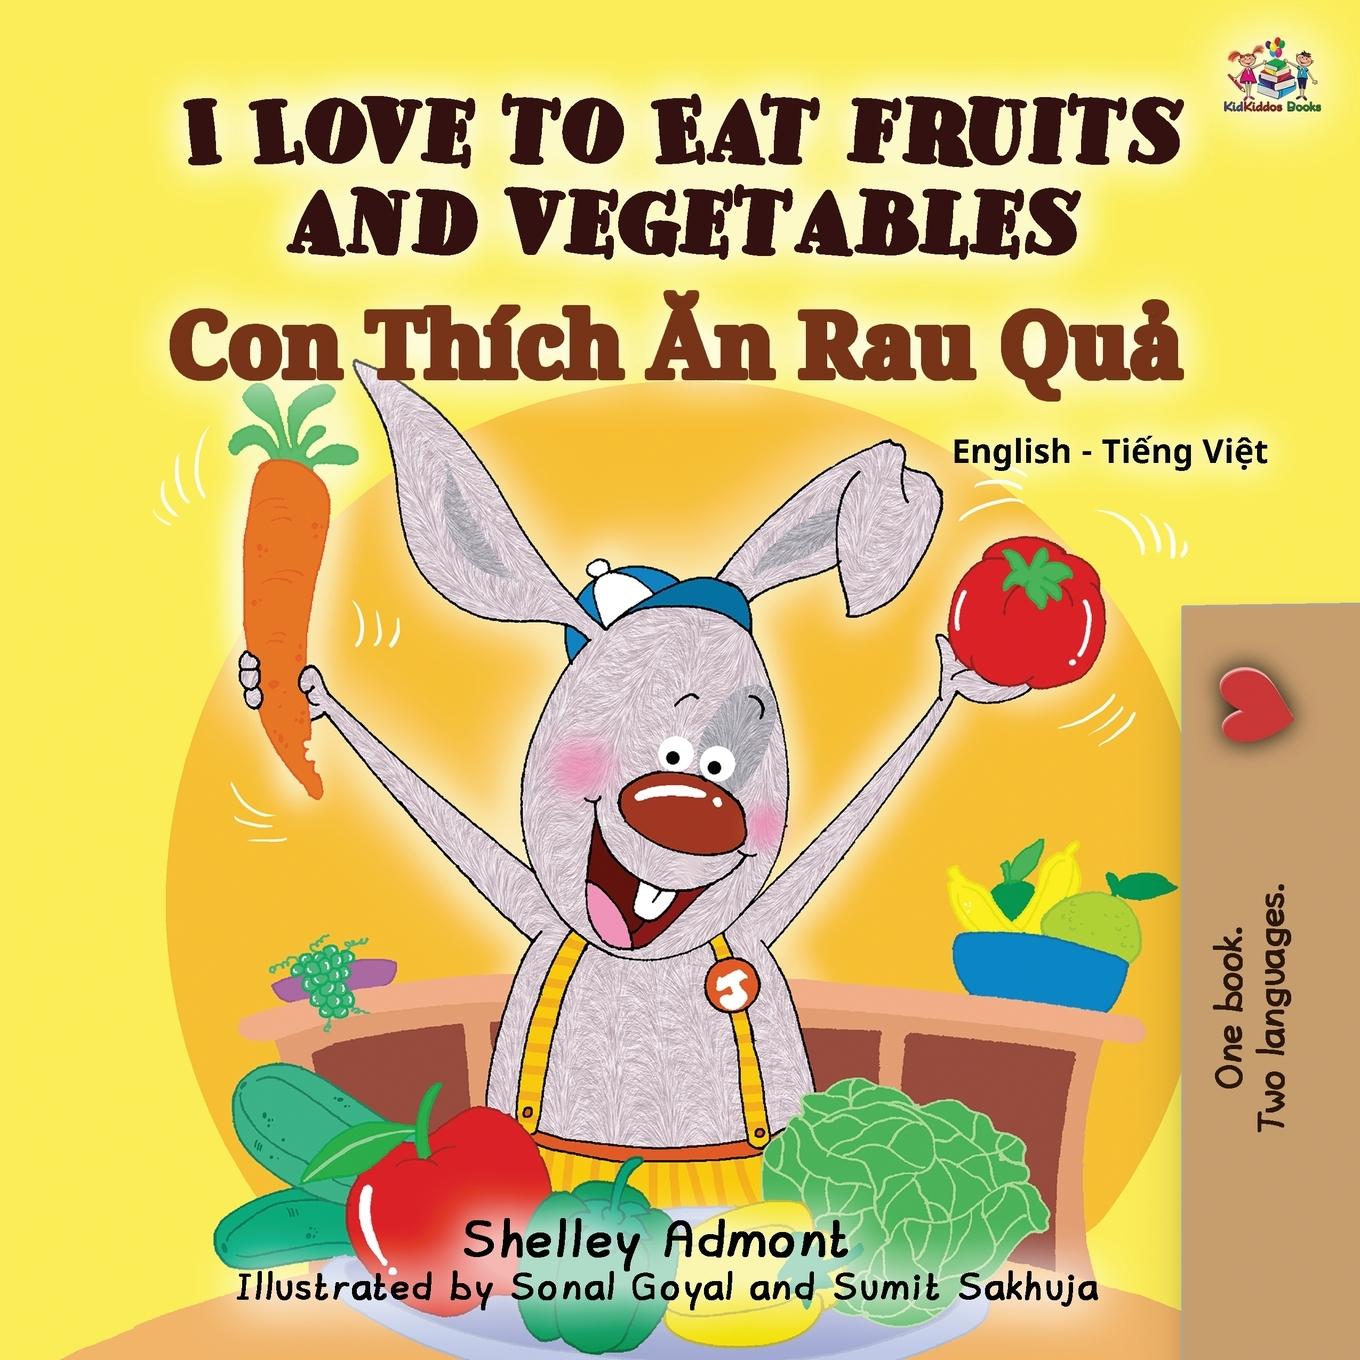 Kniha I Love to Eat Fruits and Vegetables (English Vietnamese Bilingual Book for Kids) Kidkiddos Books